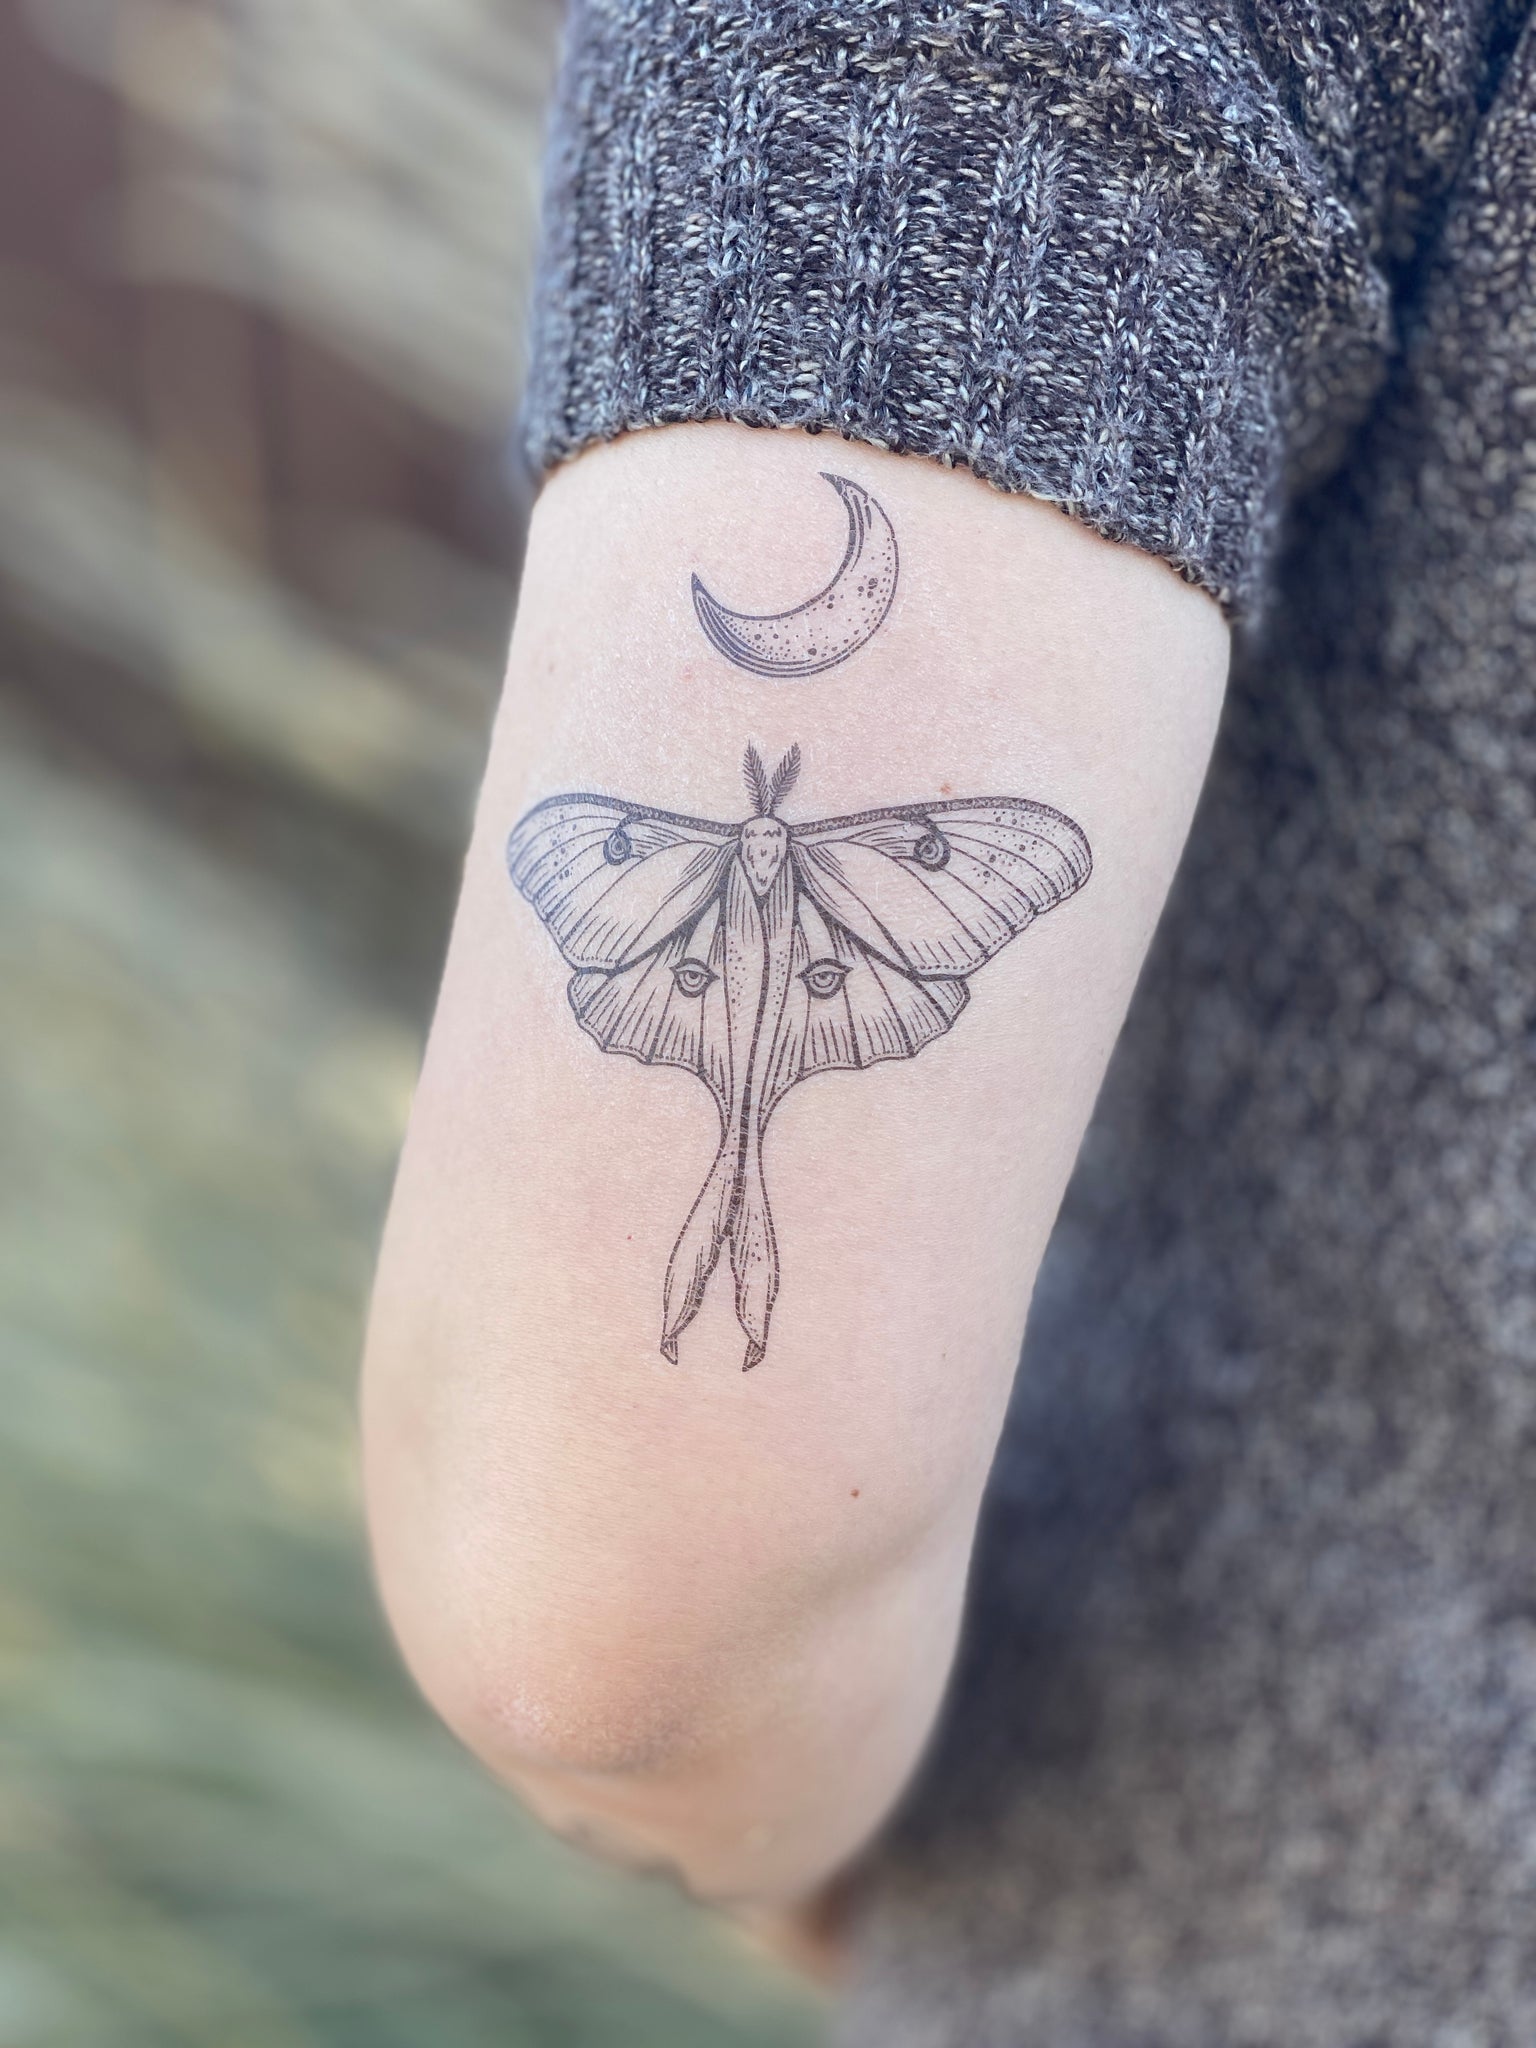 Butterfly tattoo designs for ladies | Simple butterfly tattoo | Butterfly  tattoo pictures gallery - YouTube